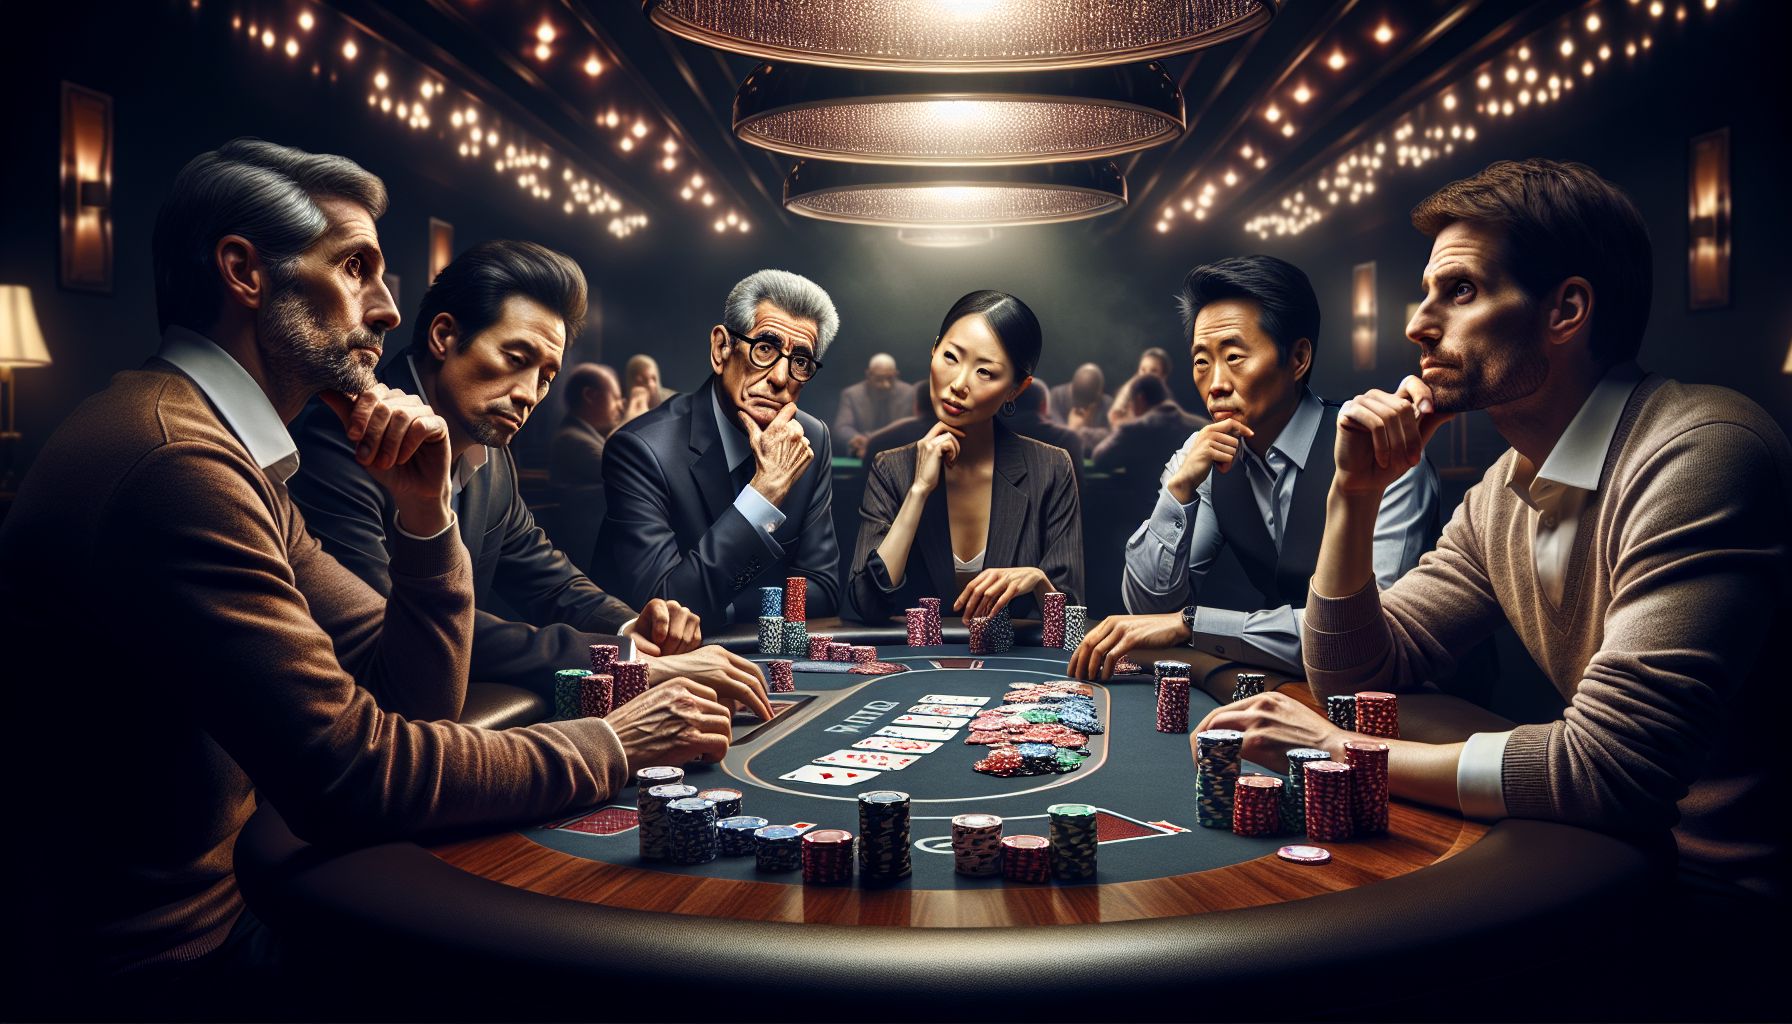 Reading the Table: Advanced Body Language Tips for Casino Poker